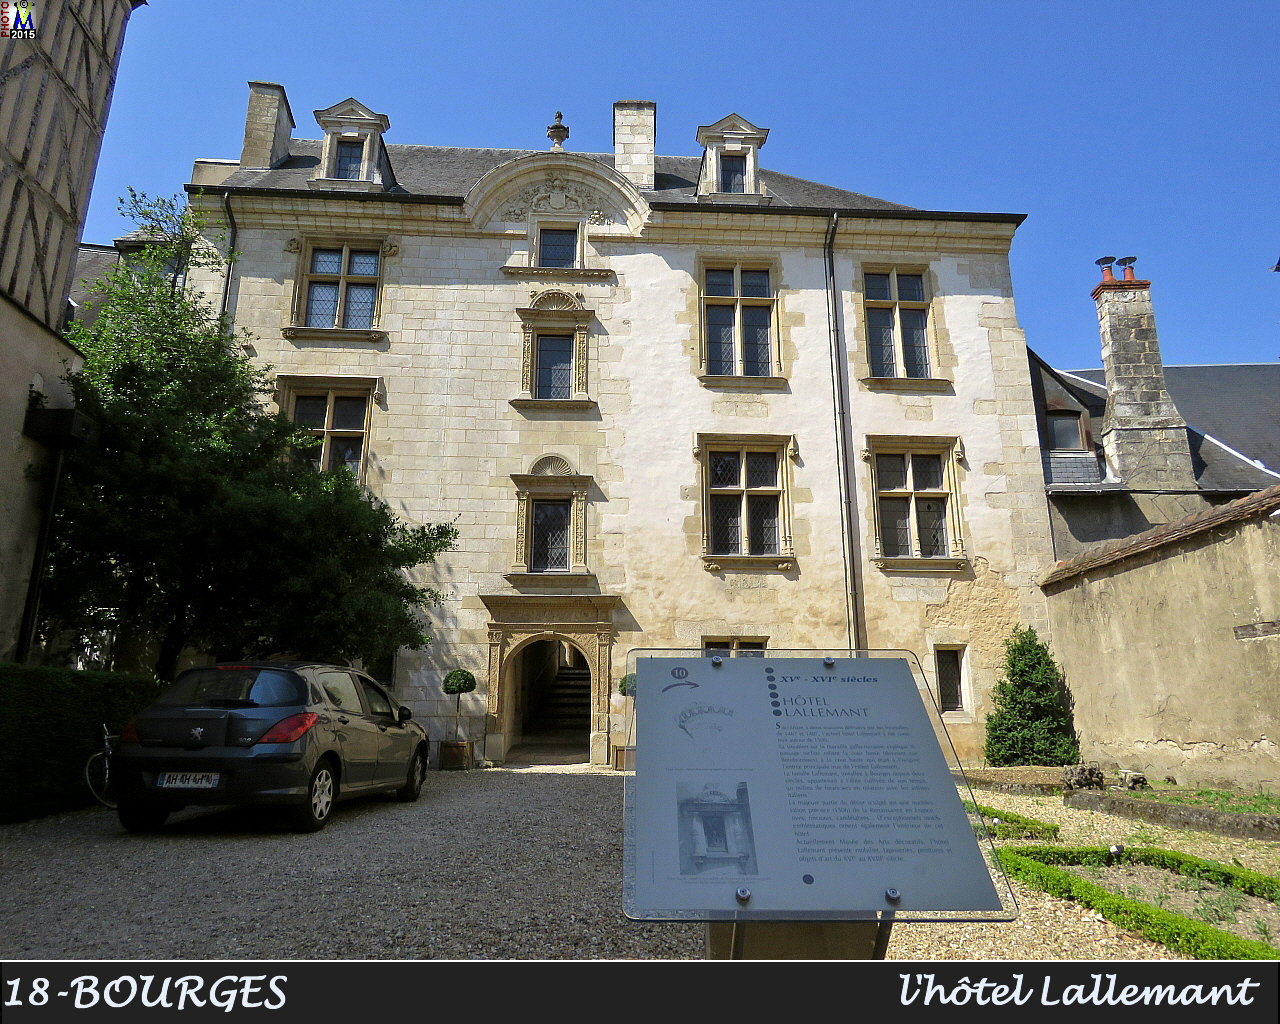 18BOURGES-hotelLallemant_100.jpg